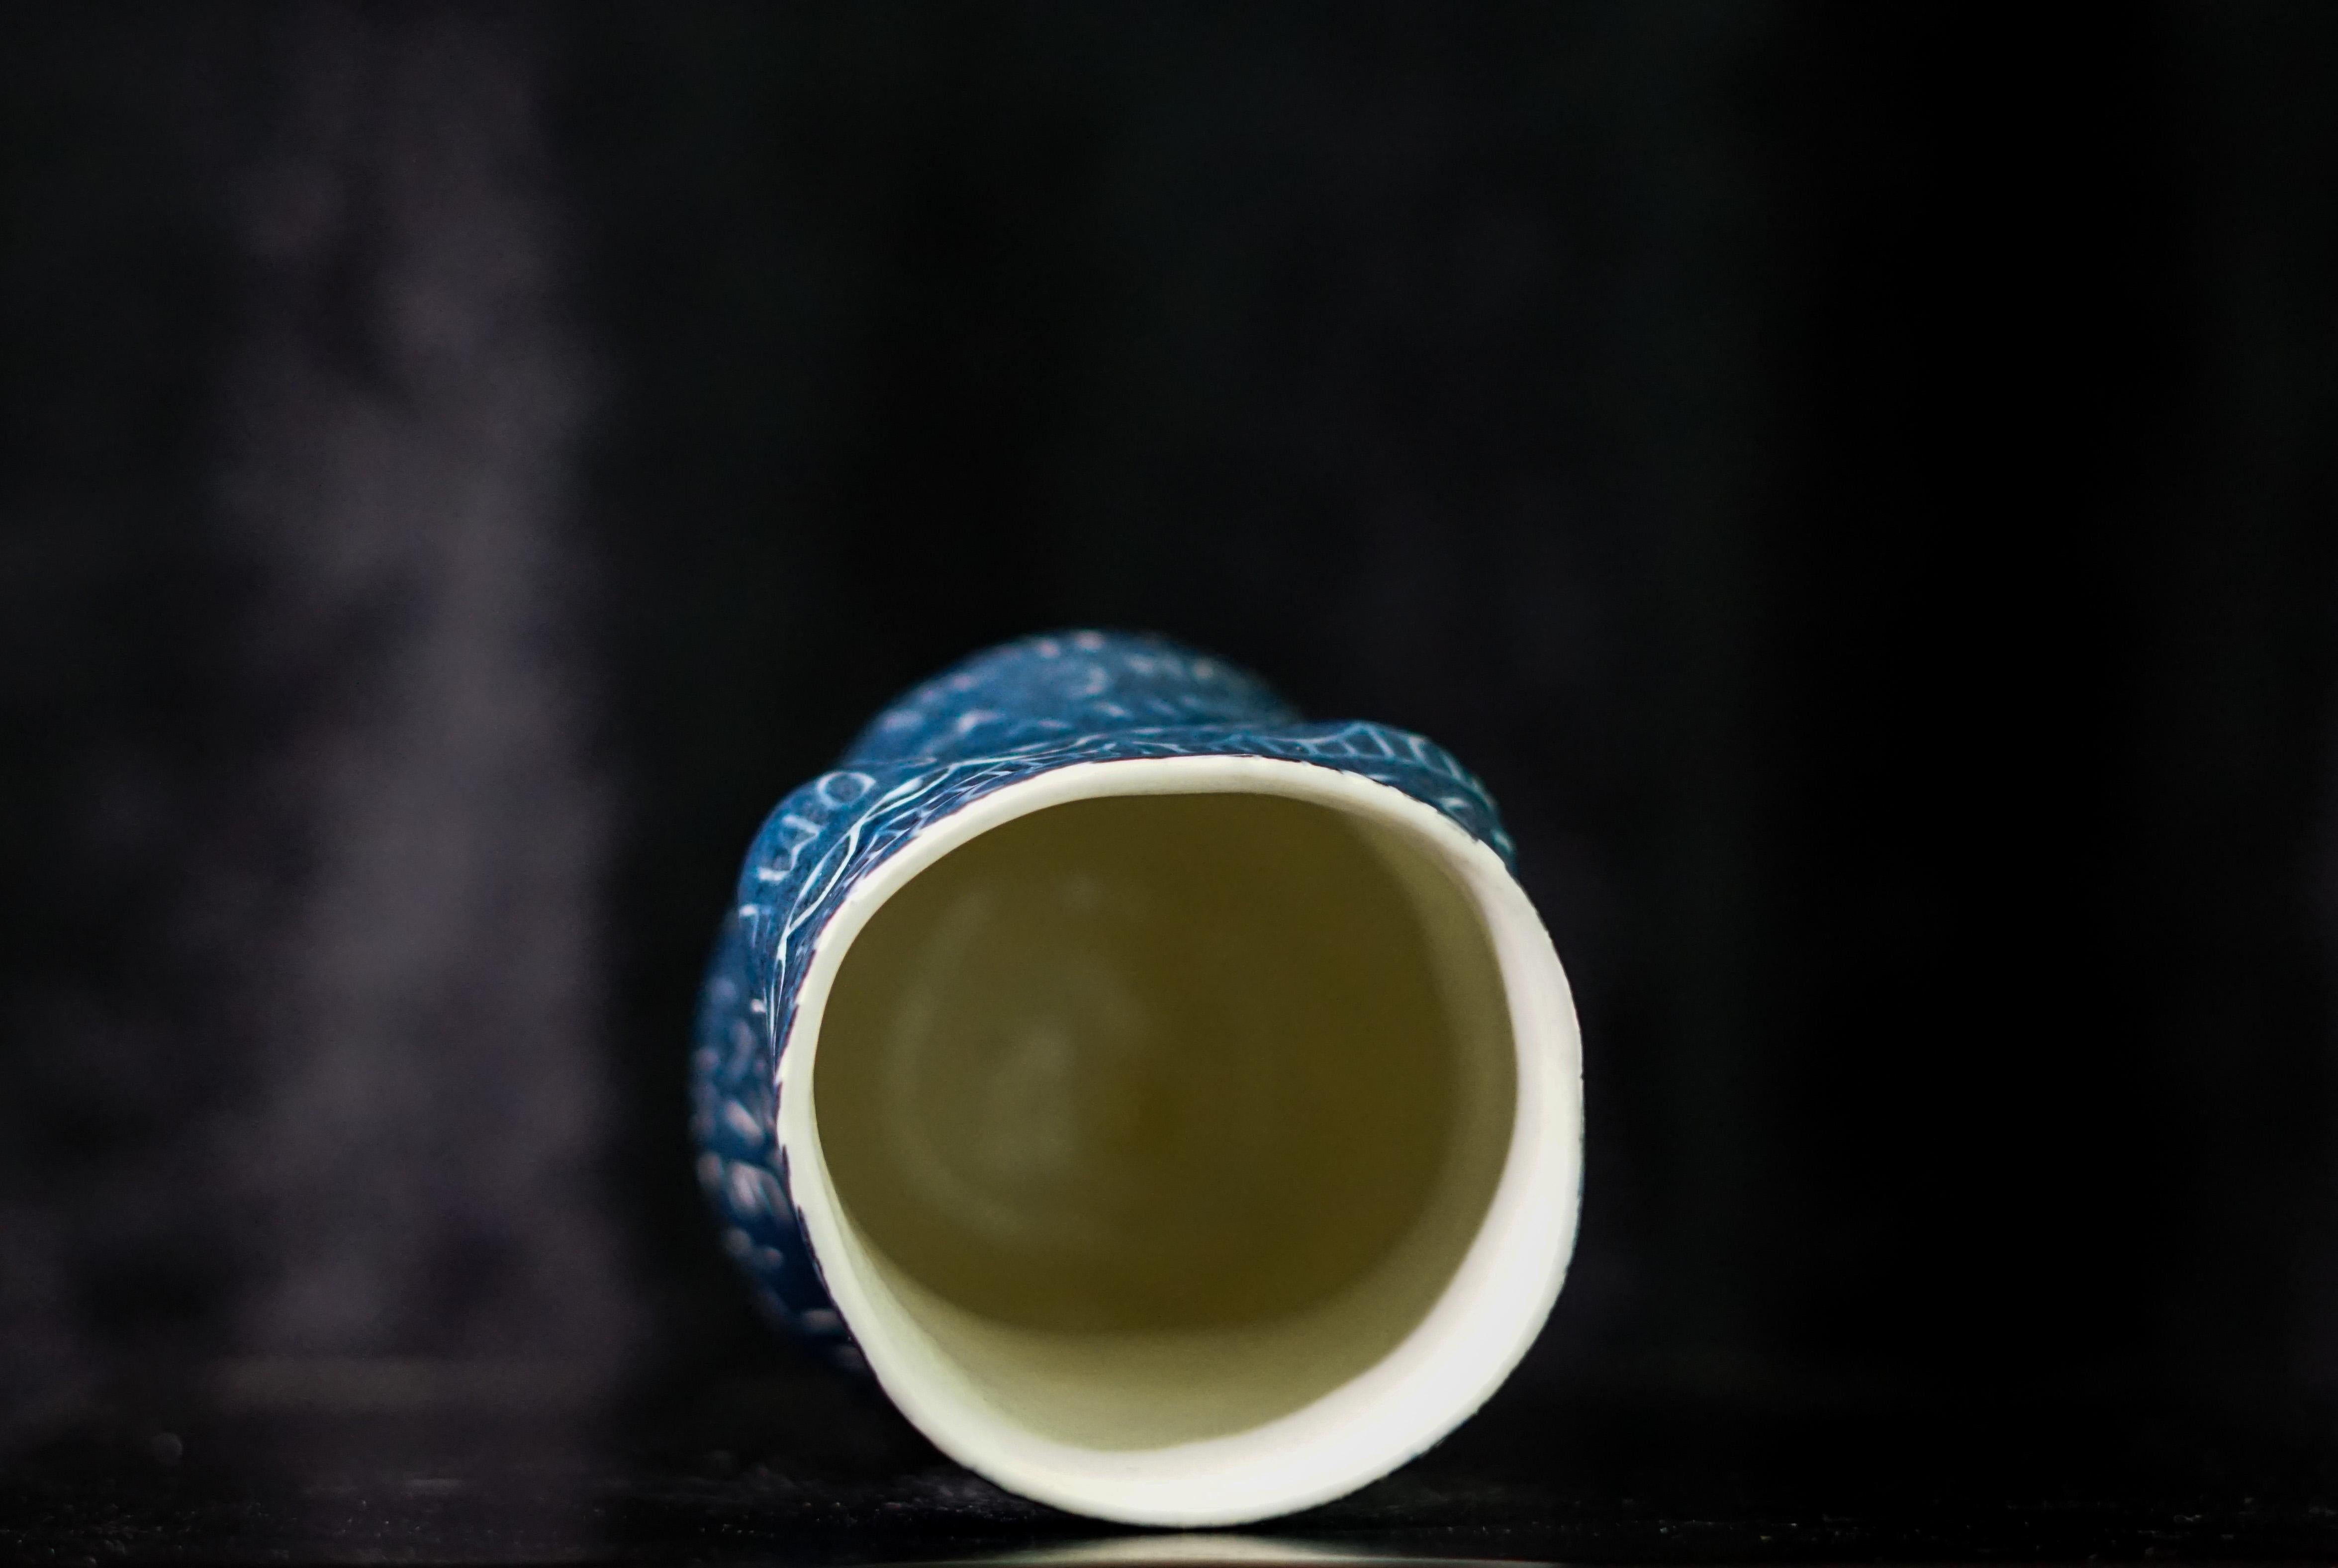 “You Wanted Something...” Porcelain cup with sgraffito detailing by the artist For Sale 4